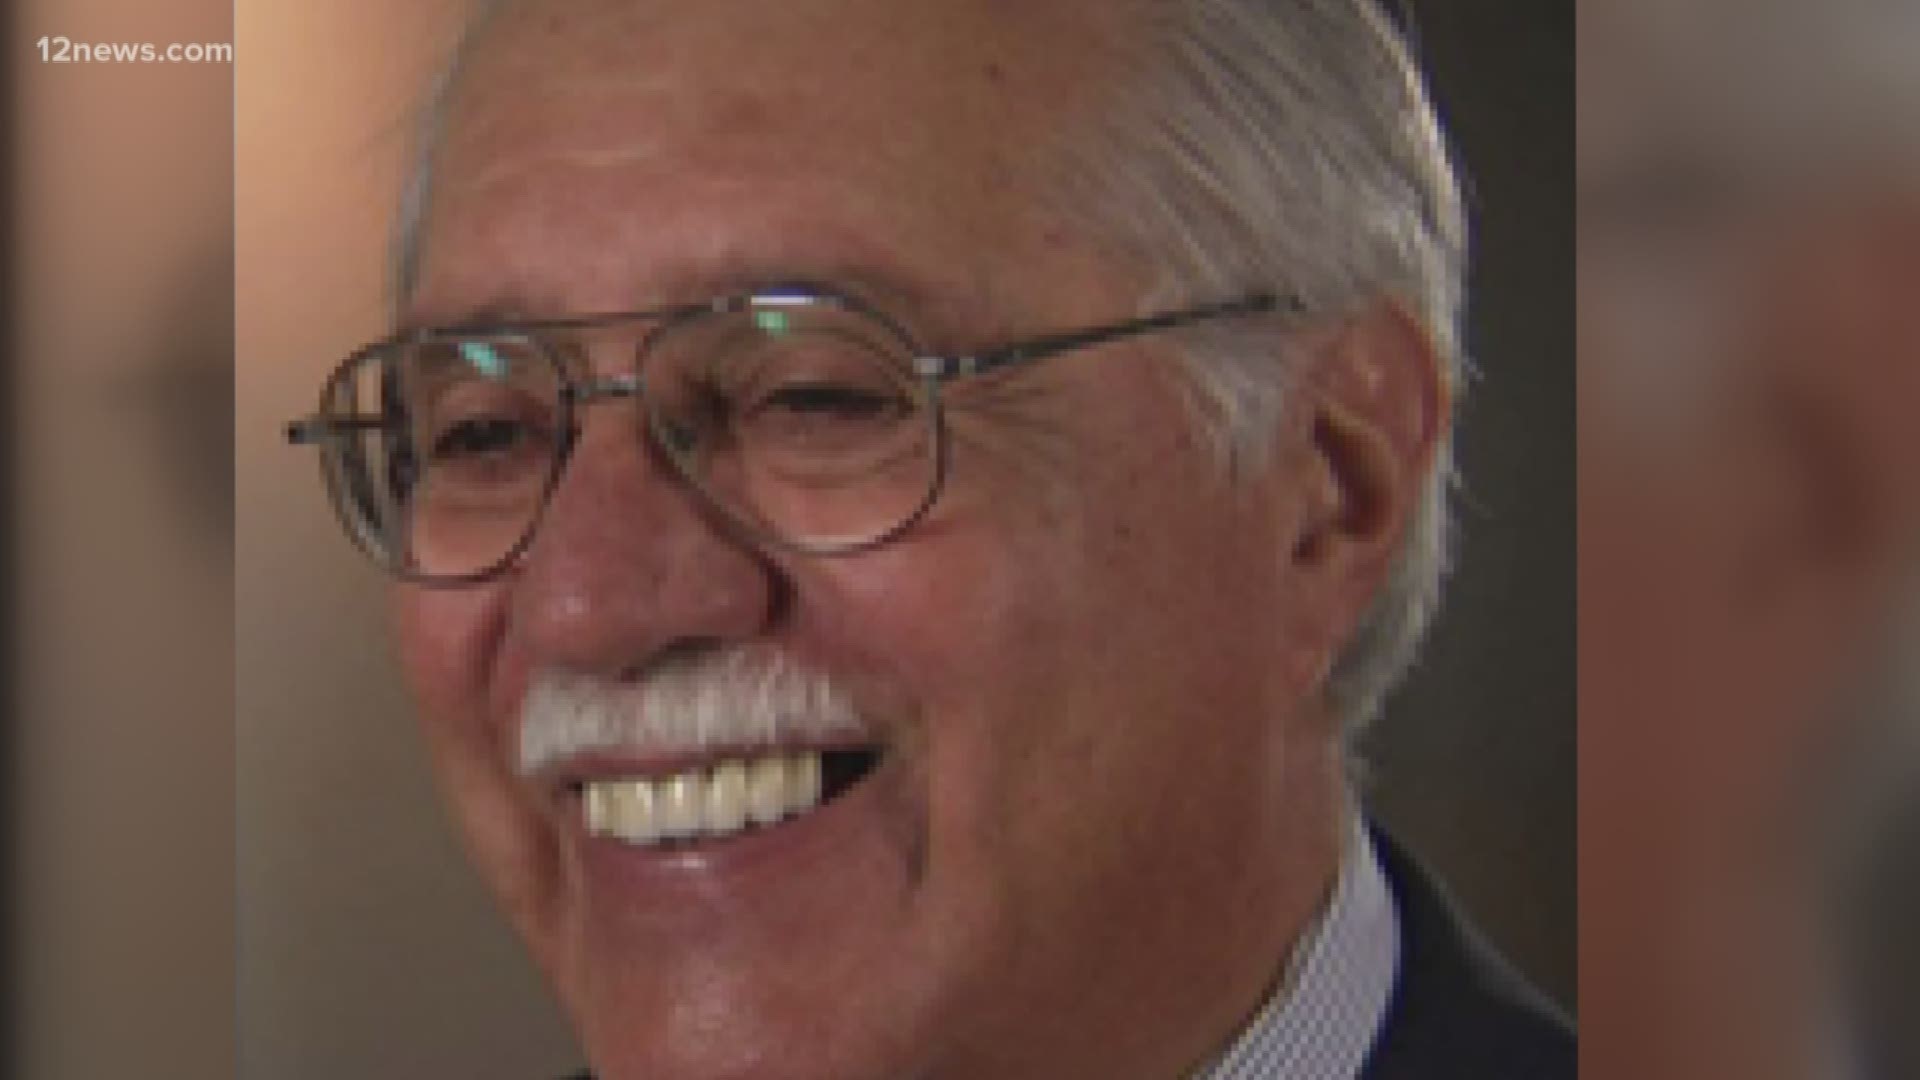 "Sunday Square Off" and Arizonans remember longtime Congressman Ed Pastor, who died last week at the age of 75. As Arizona's first Latino member of Congress, Pastor nurtured a generation of Latino leaders.